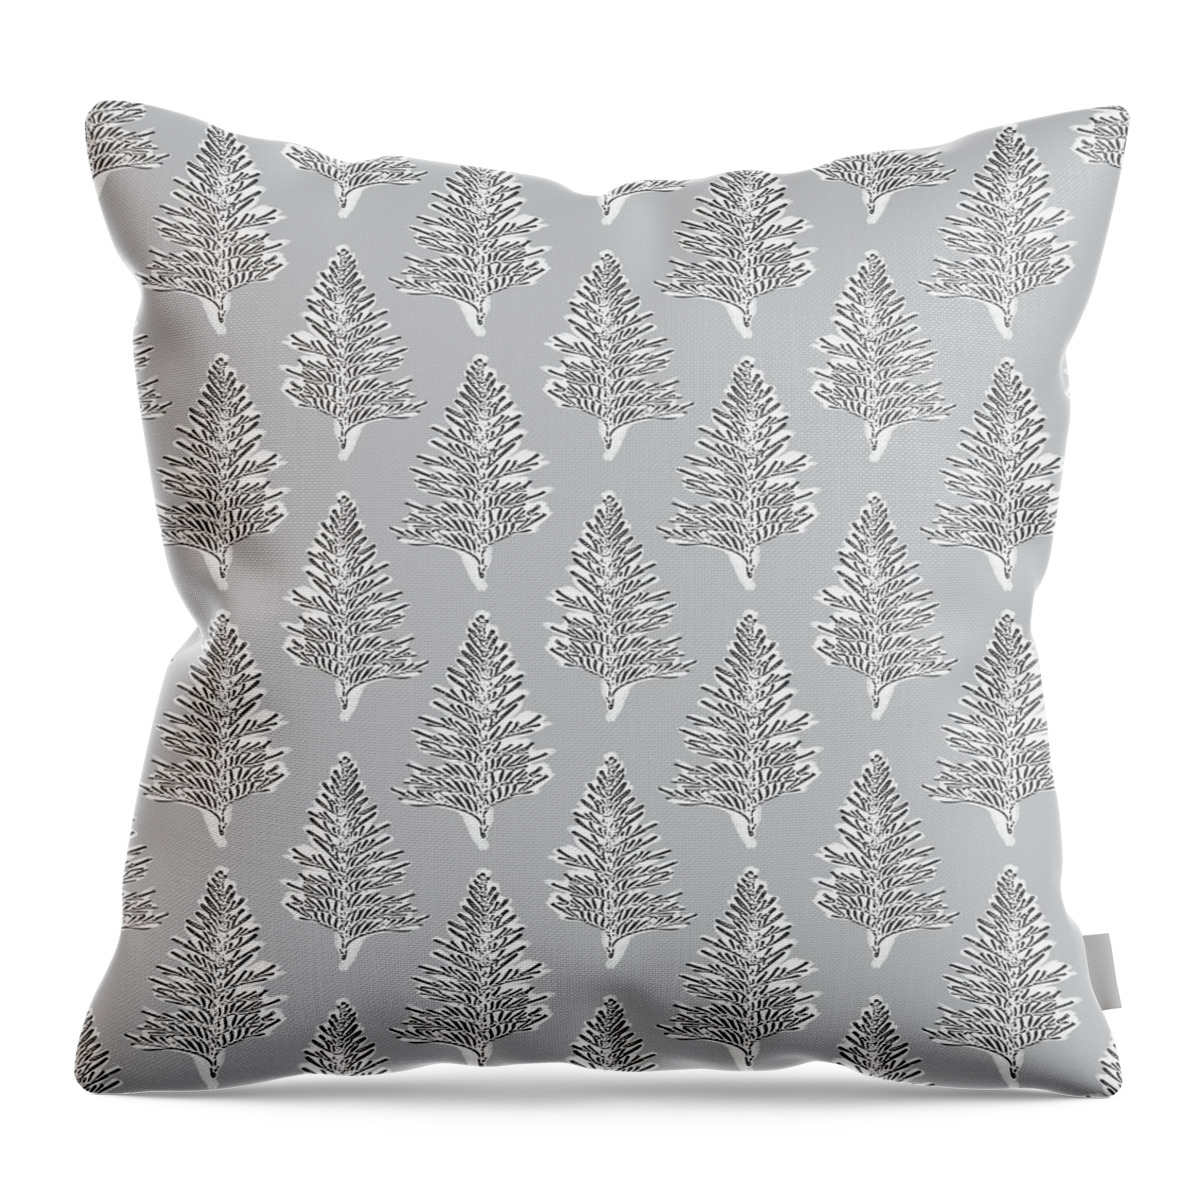 Grey Throw Pillow featuring the mixed media Winter Leaves- Art by Linda Woods by Linda Woods